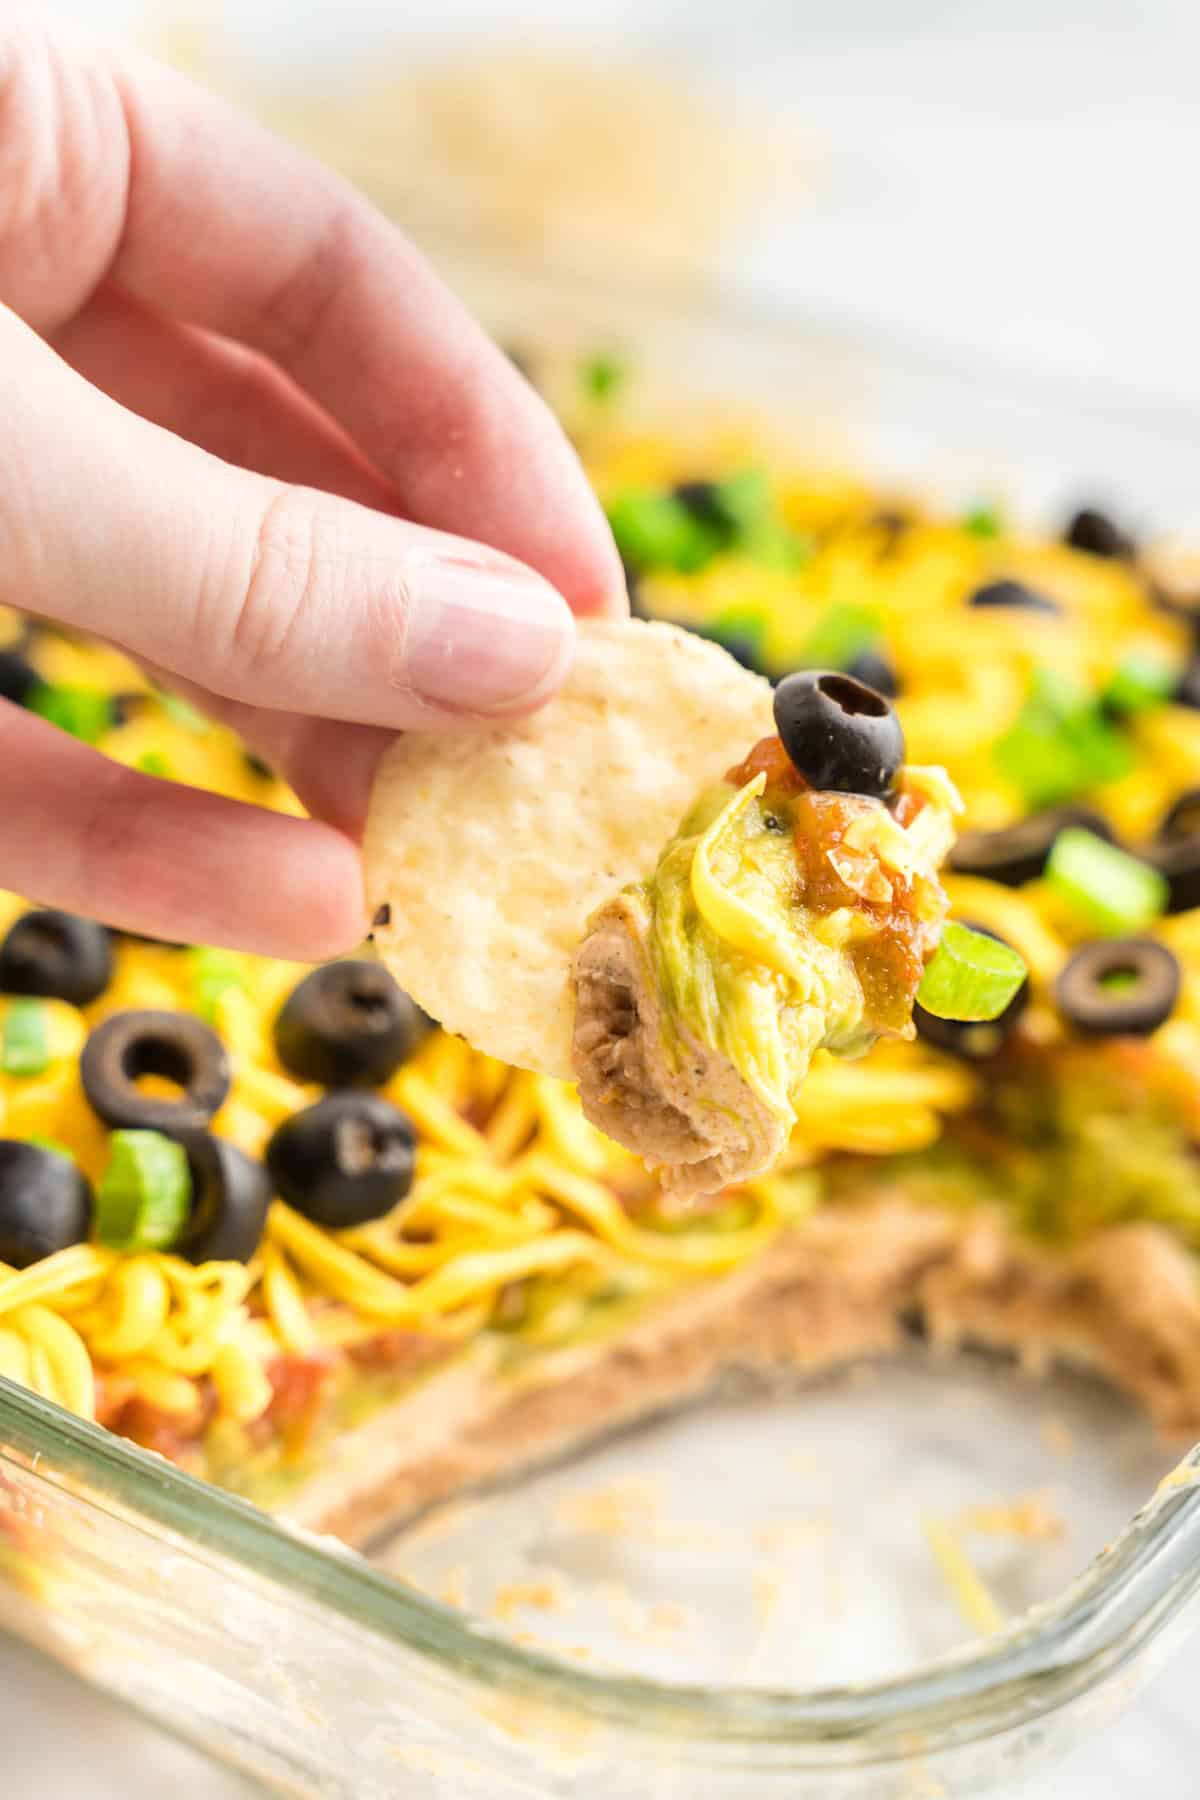 7 Layer Taco Dip in Serving Dish Using Tortilla Chip to Dip